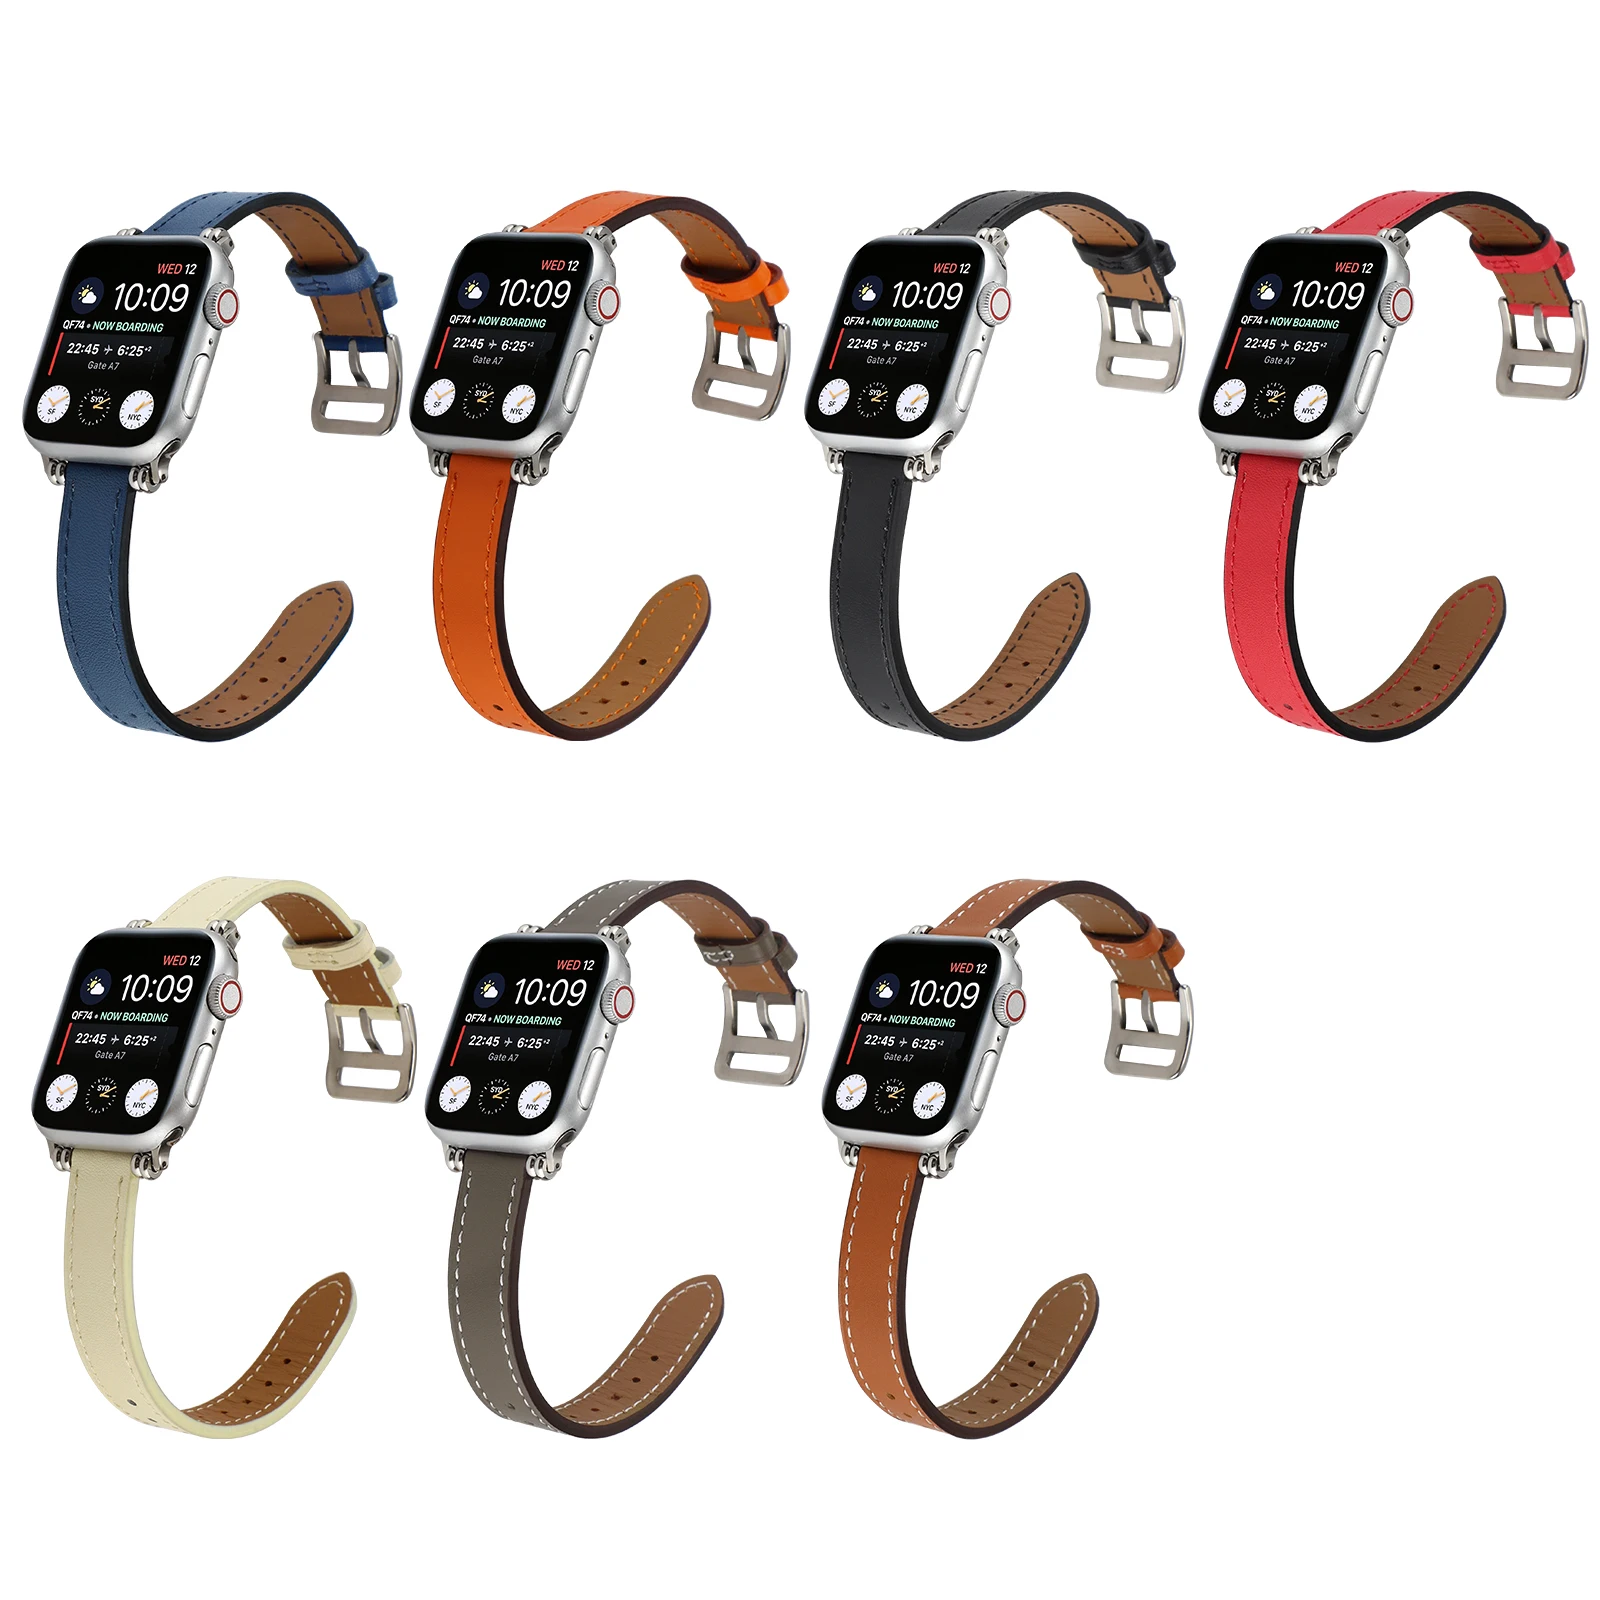 

slim fit Loop for Apple Watch Leather Band 40mm 44mm for iwatch 38mm 42mm Strap series 5 4 3 2 1